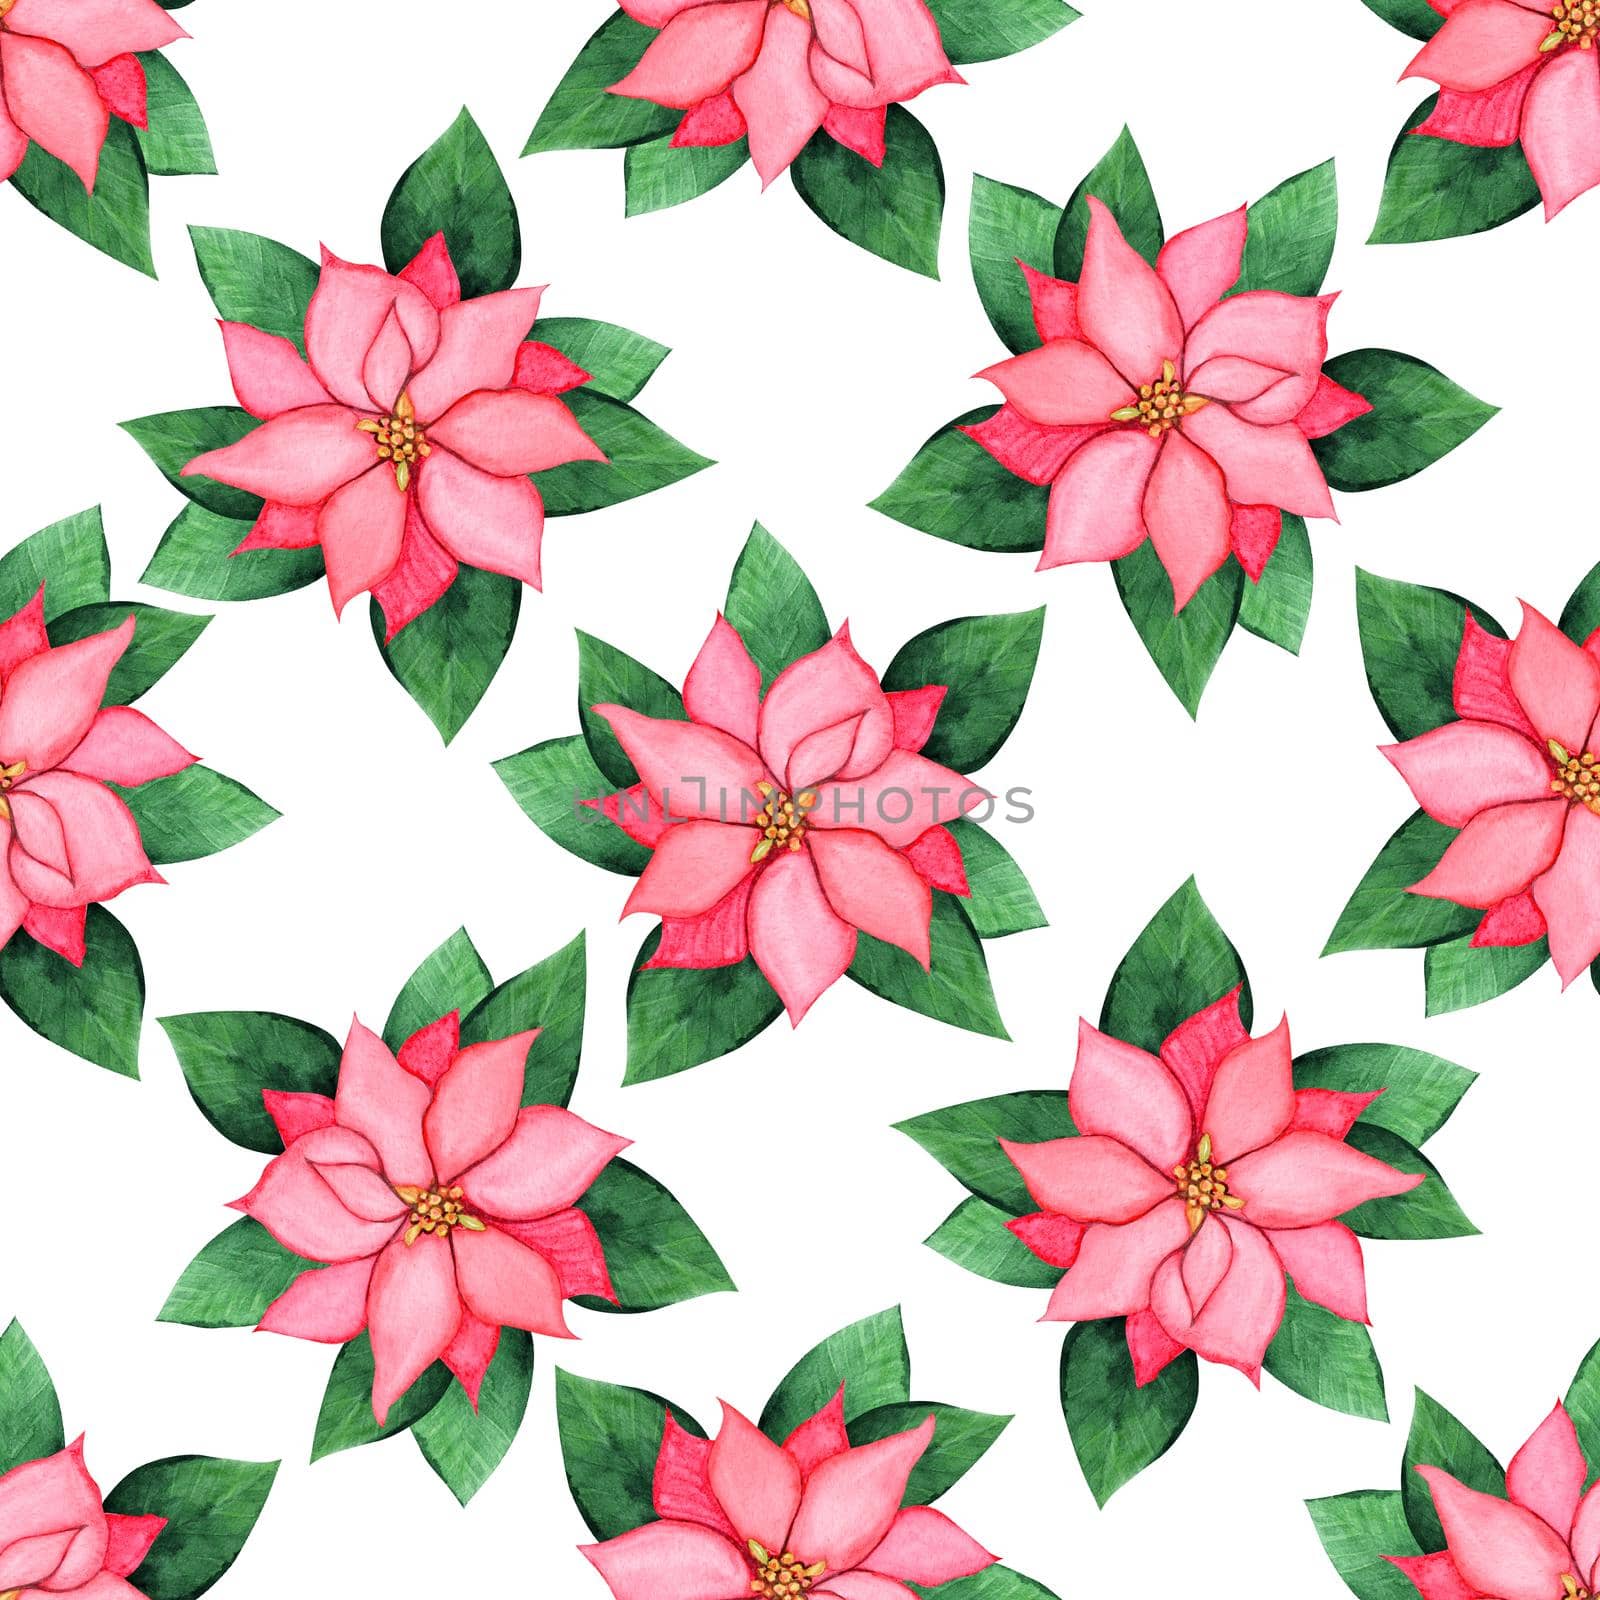 Watercolor christmas poinsettia seamless pattern on white background by dreamloud